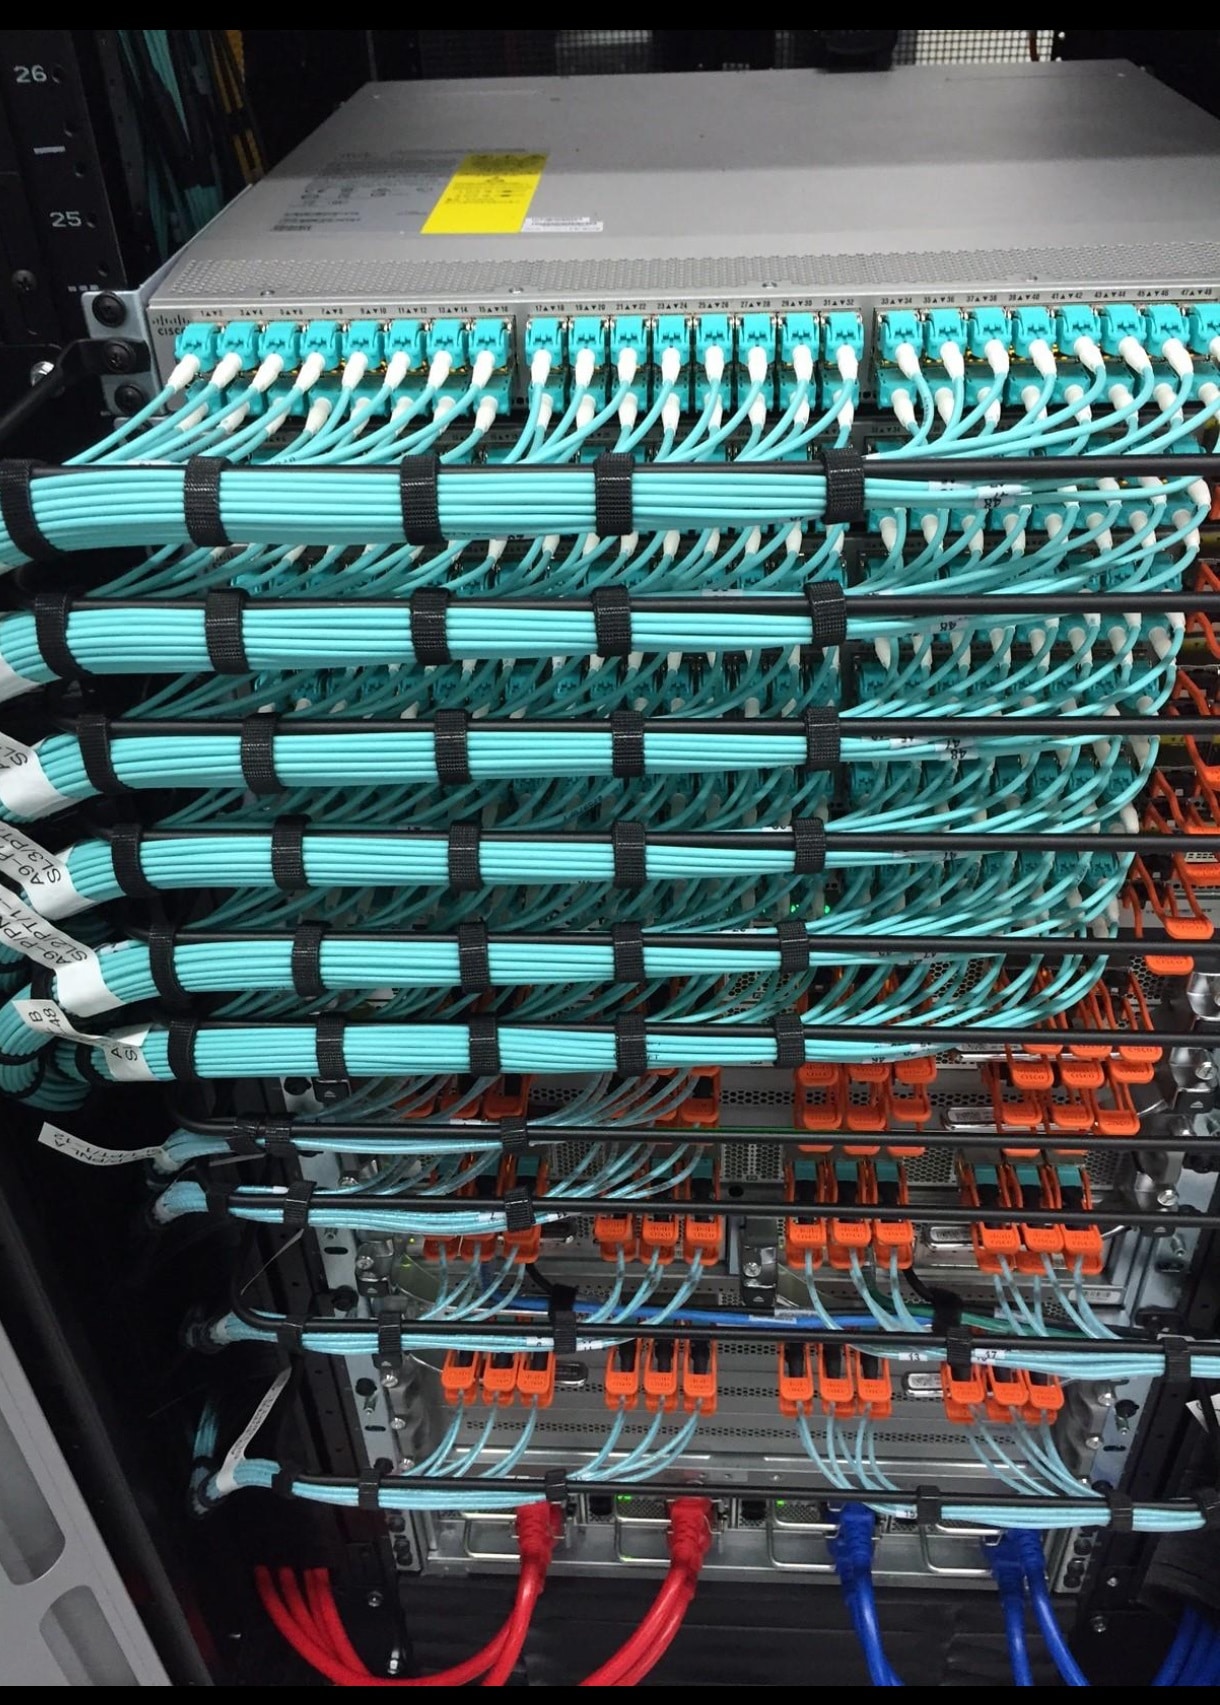 fiber chasis in structured cabling system